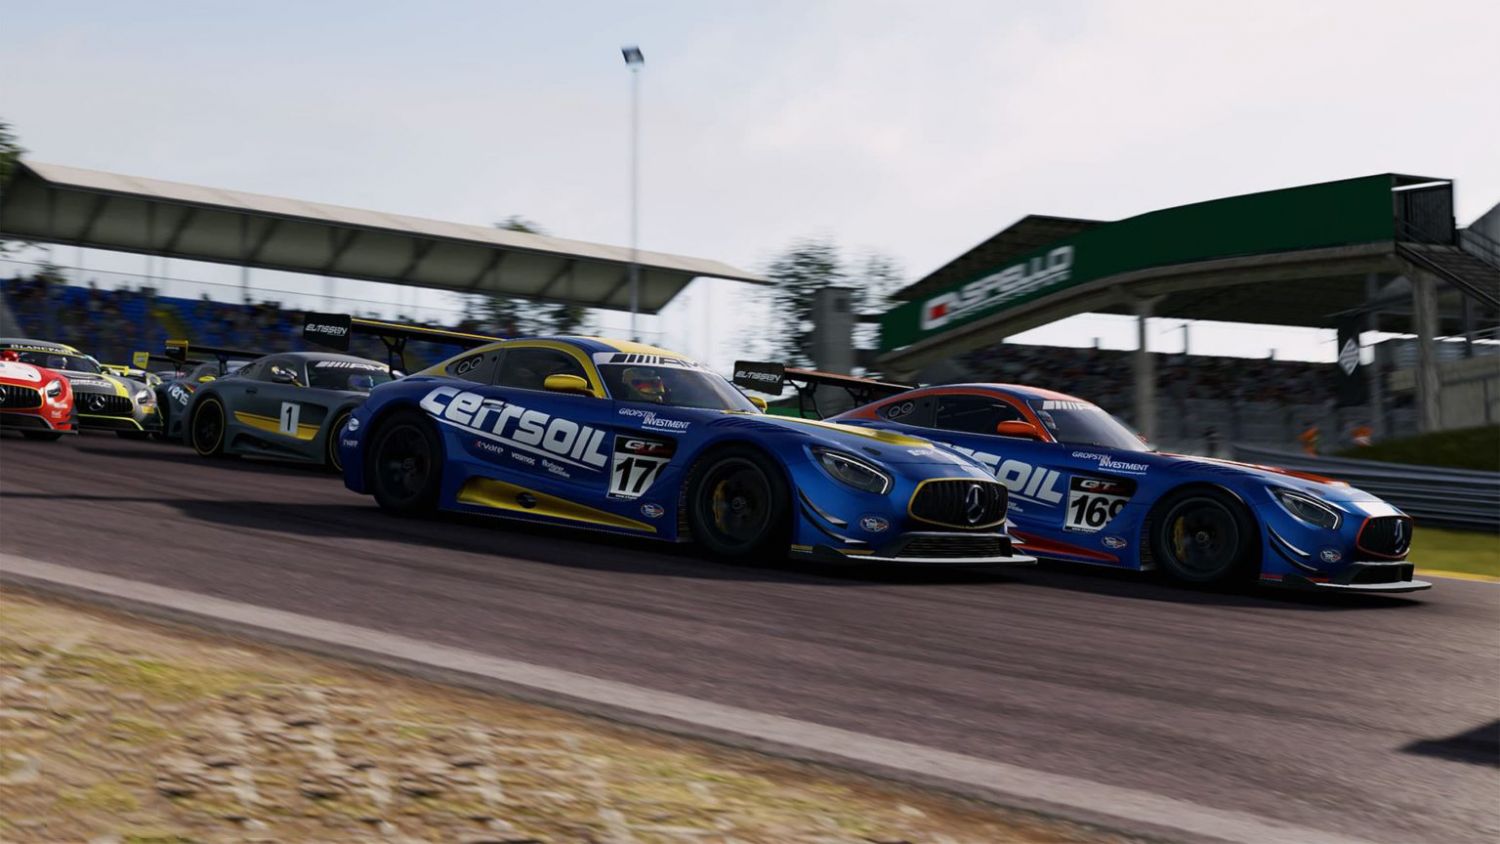 Project CARS 3 review: A drastic departure in most areas - The Race